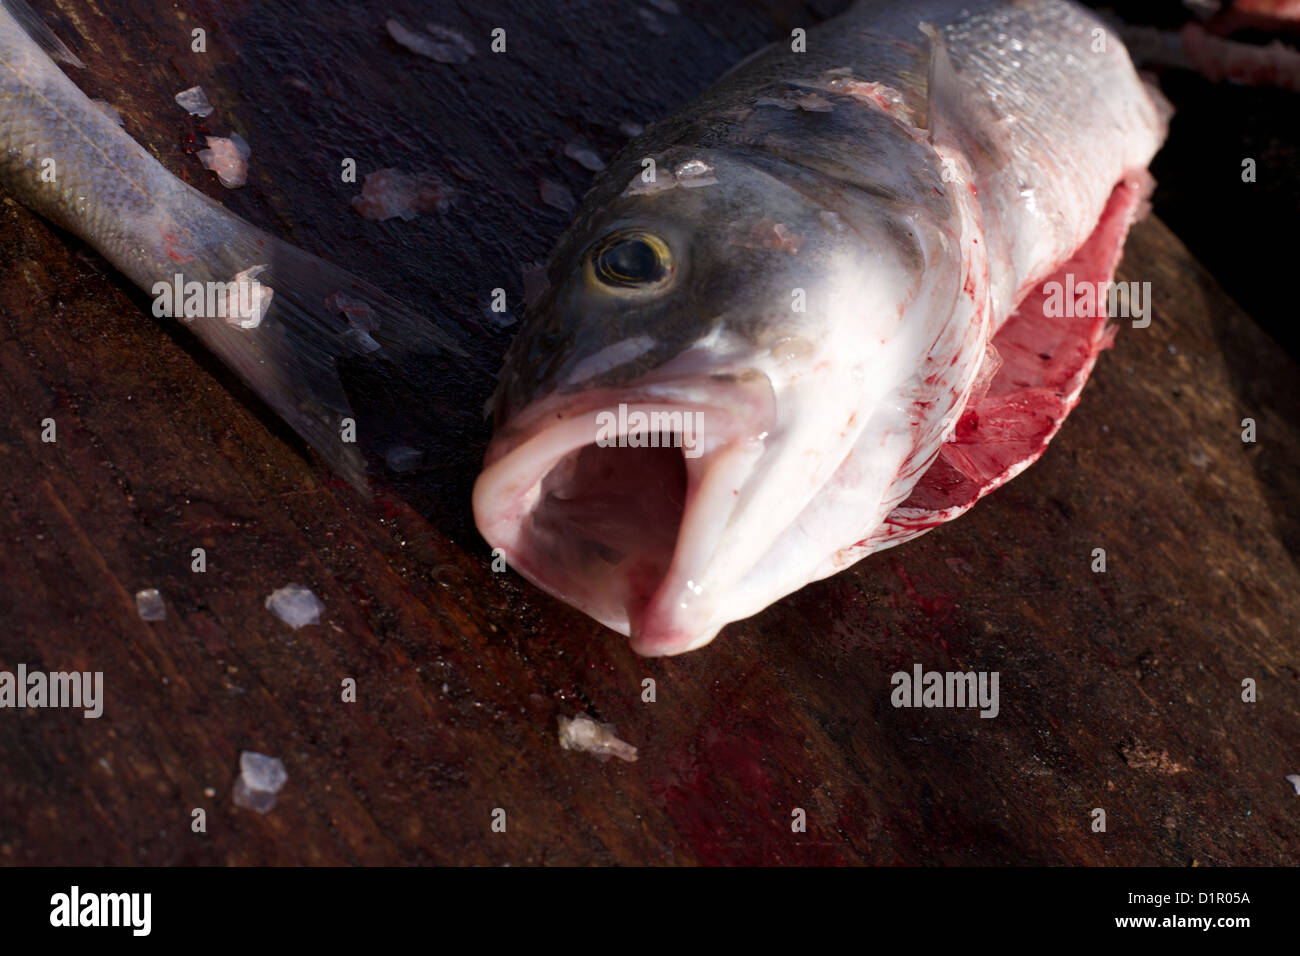 Sea bass being gutted on board fishing boat Stock Photo